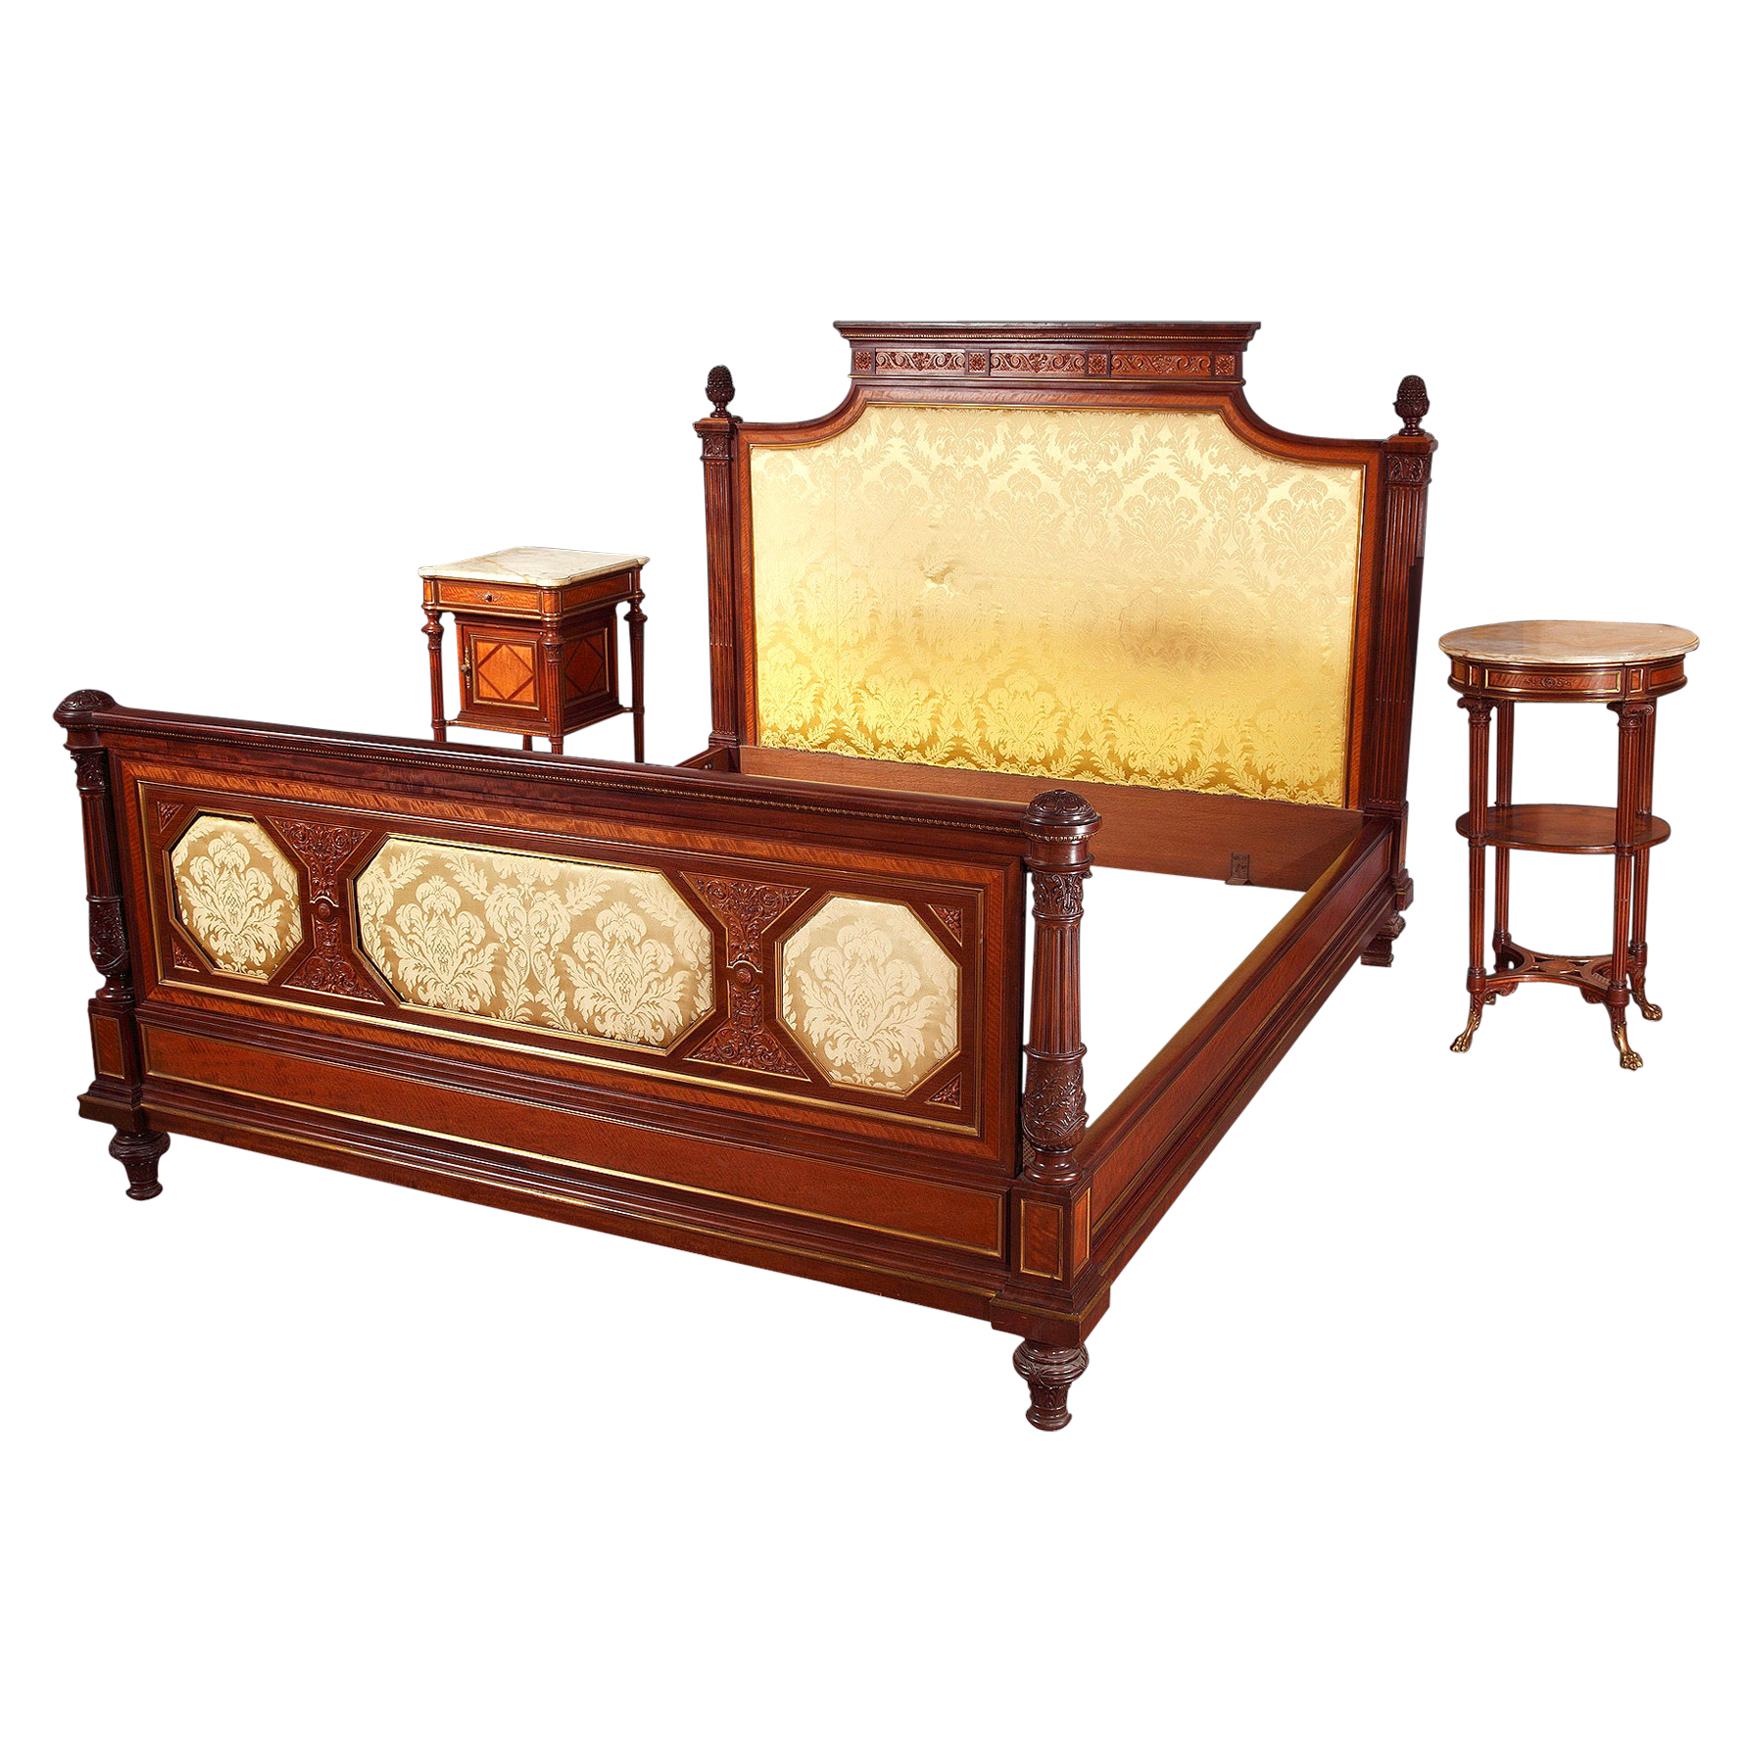 Exceptional 8 Pieces Bedroom Set by H.A. Fourdinois, France, Circa 1889 For Sale